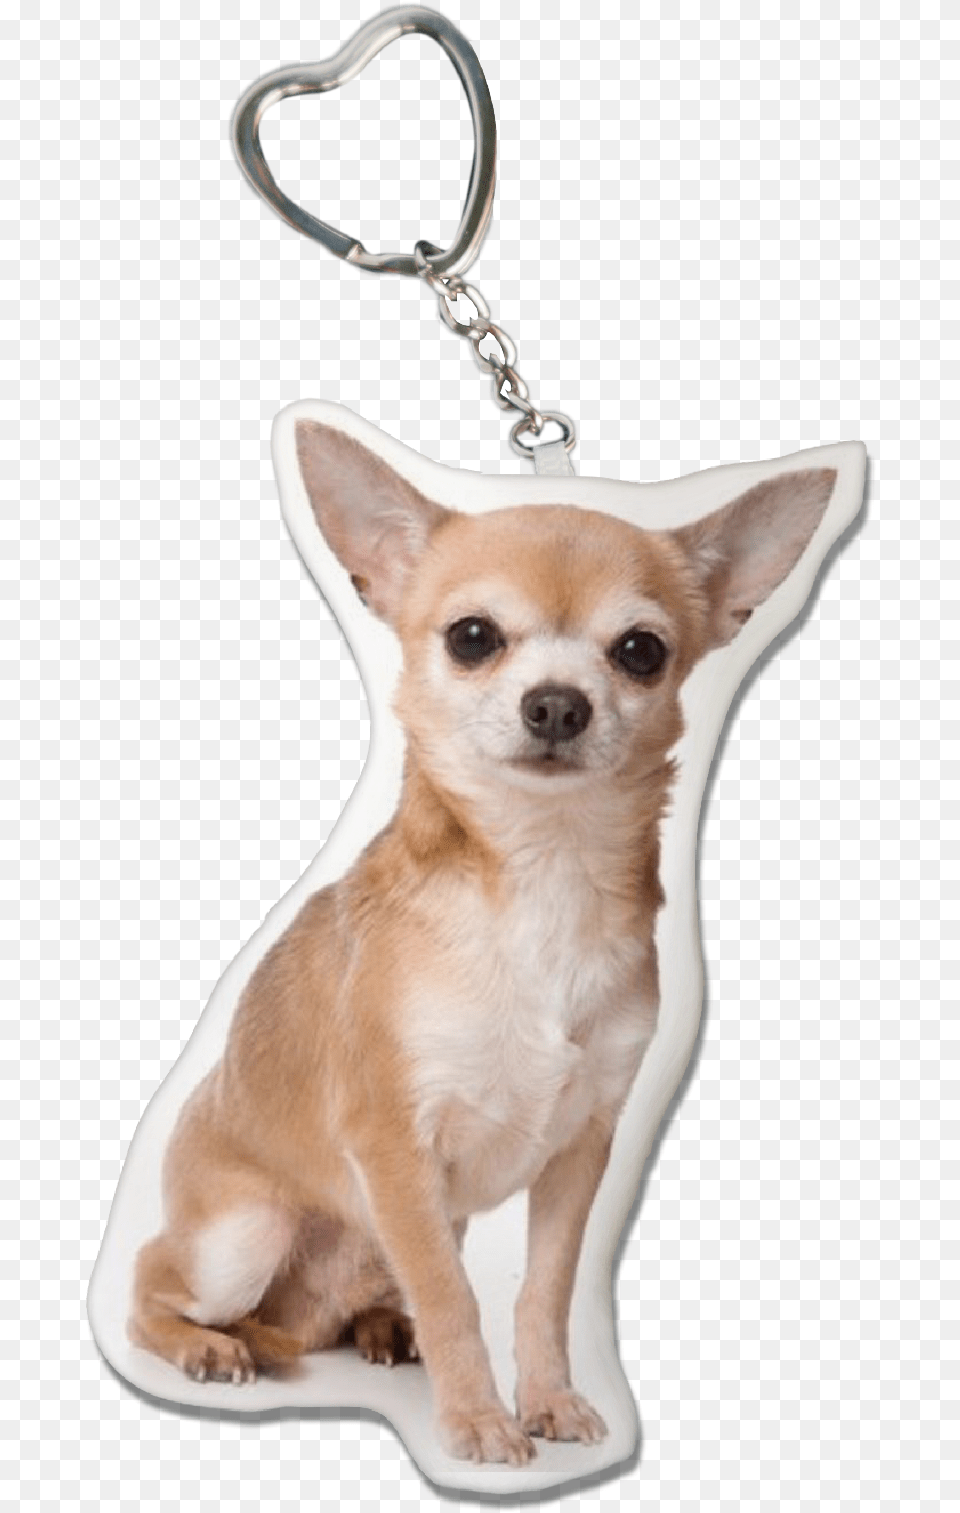 Chihuahua Key Chain Chihuahua Collectibles, Animal, Canine, Dog, Mammal Free Transparent Png